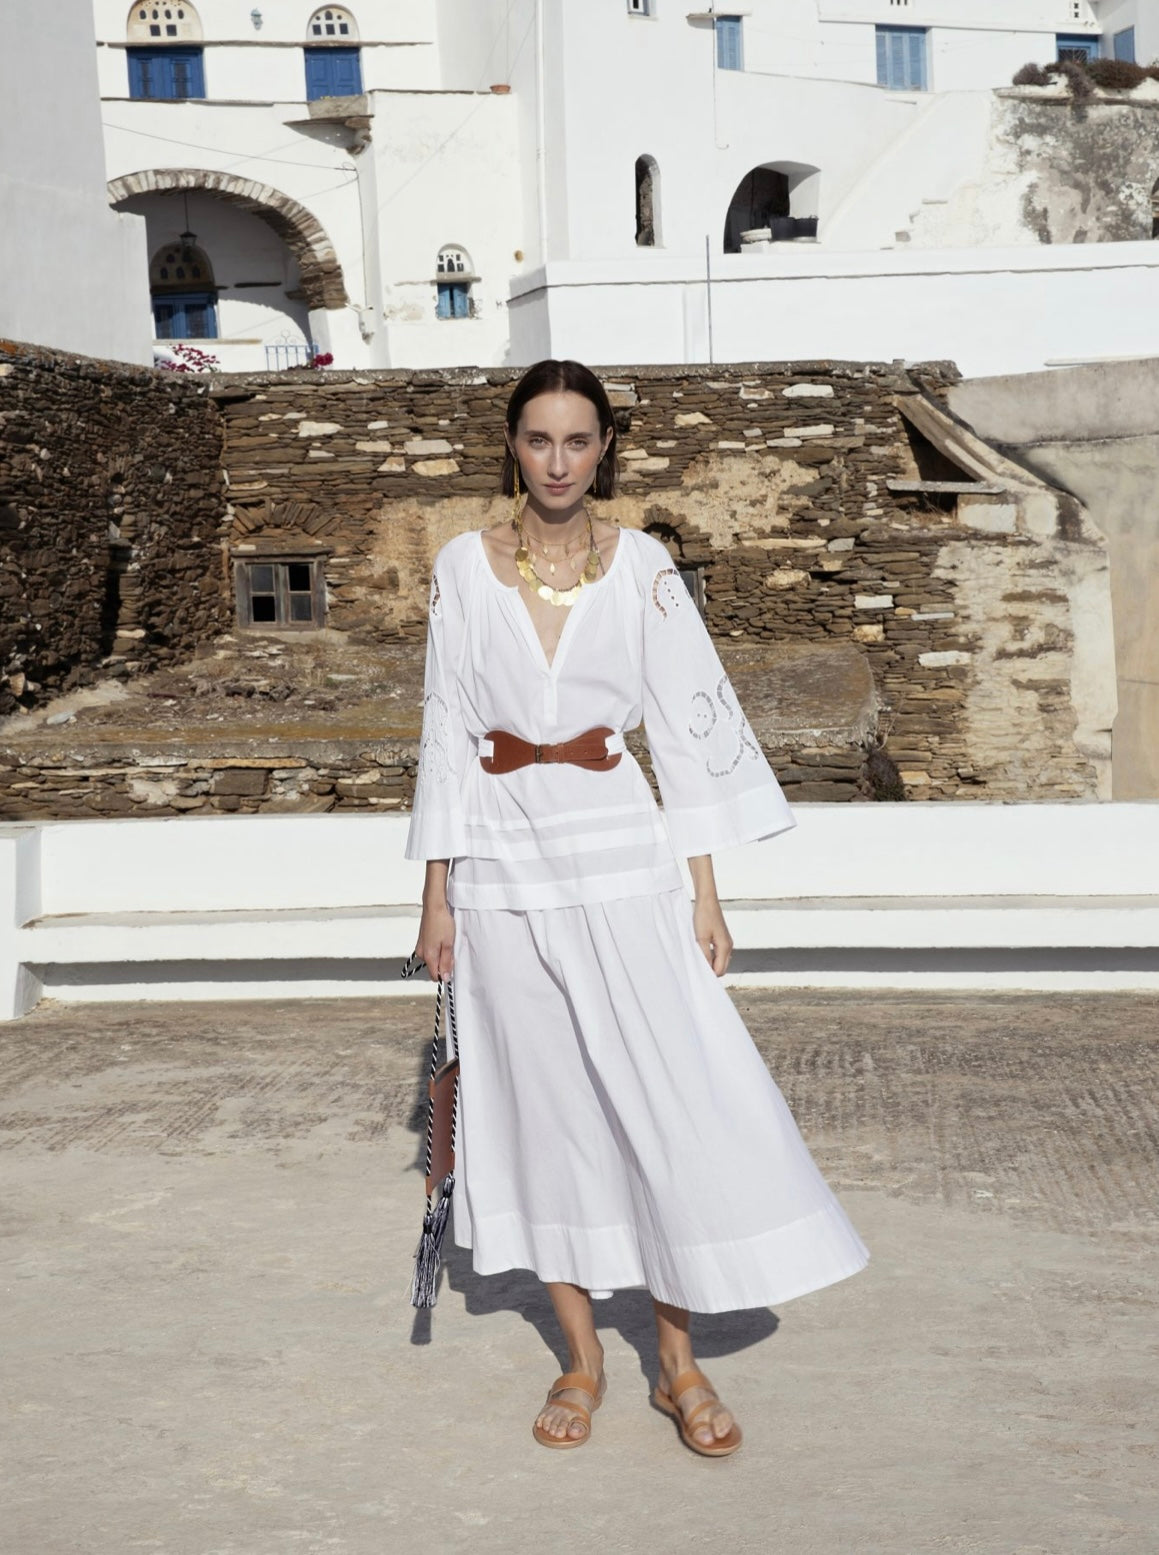 IPHIGENIA CUT EMBROIDERED LONG DRESS WITH REMOVABLE LEATHER BELT